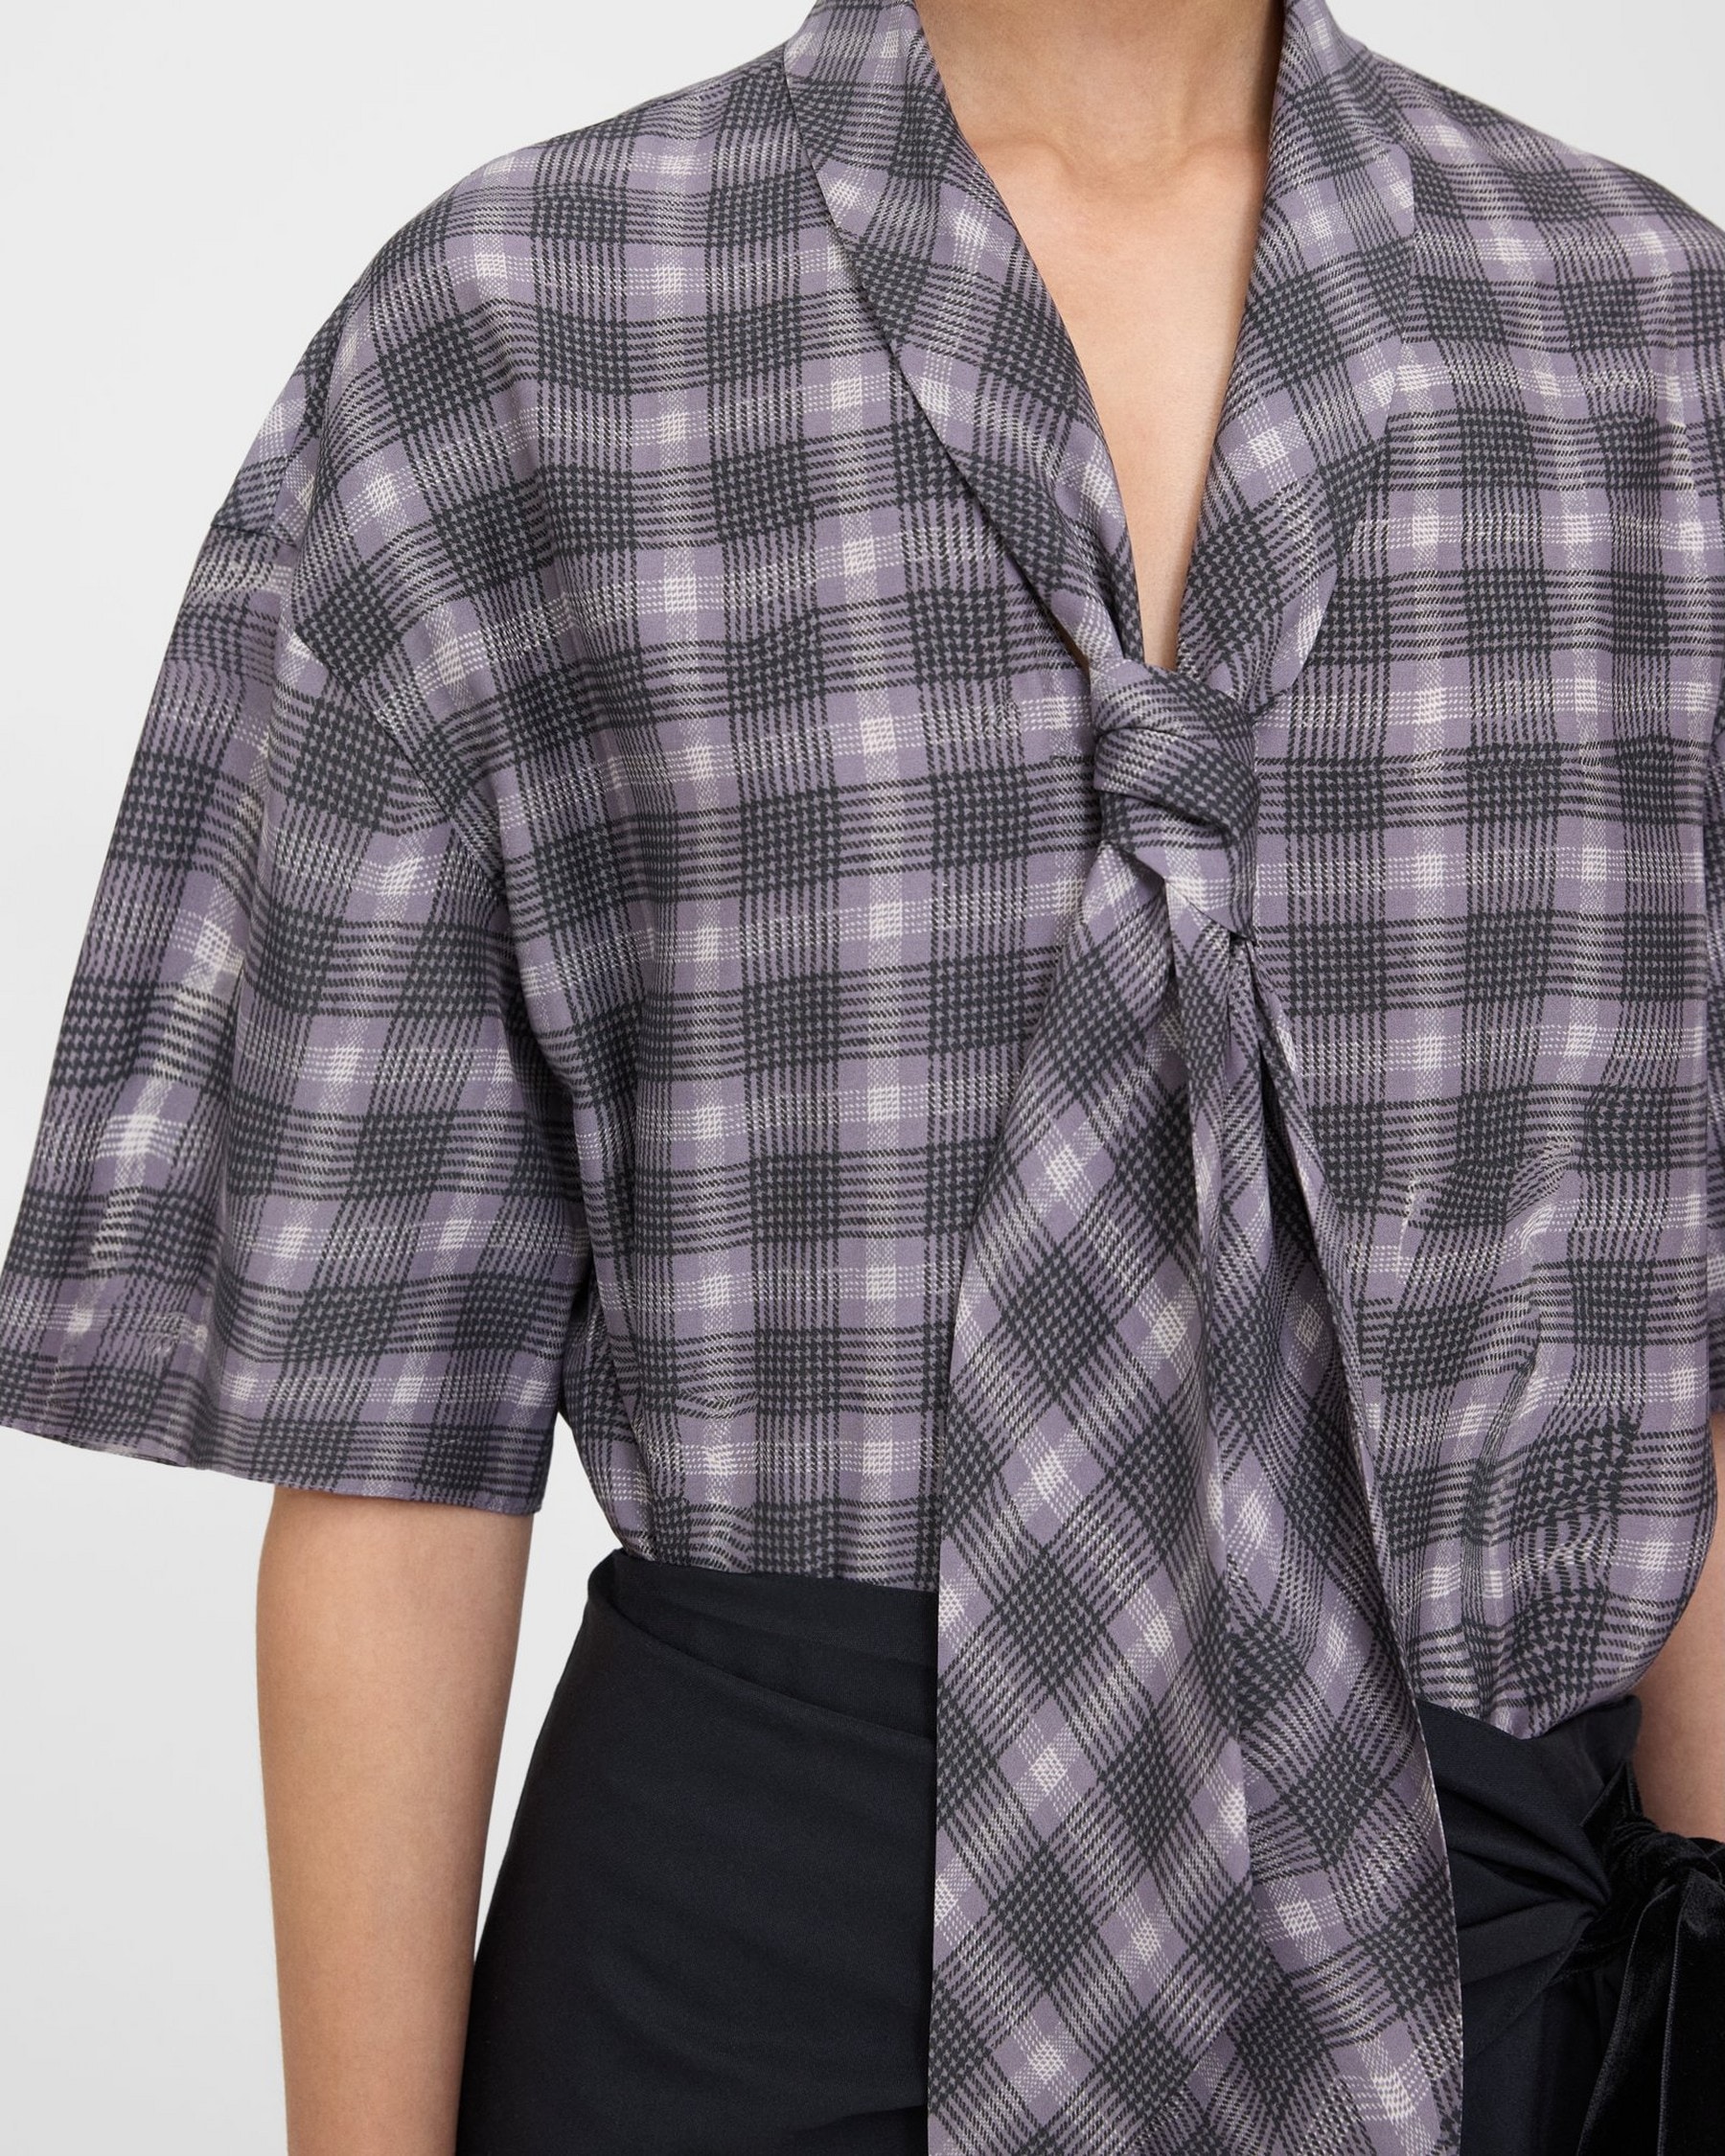 Wrinkle Check Tie-Neck Shirt